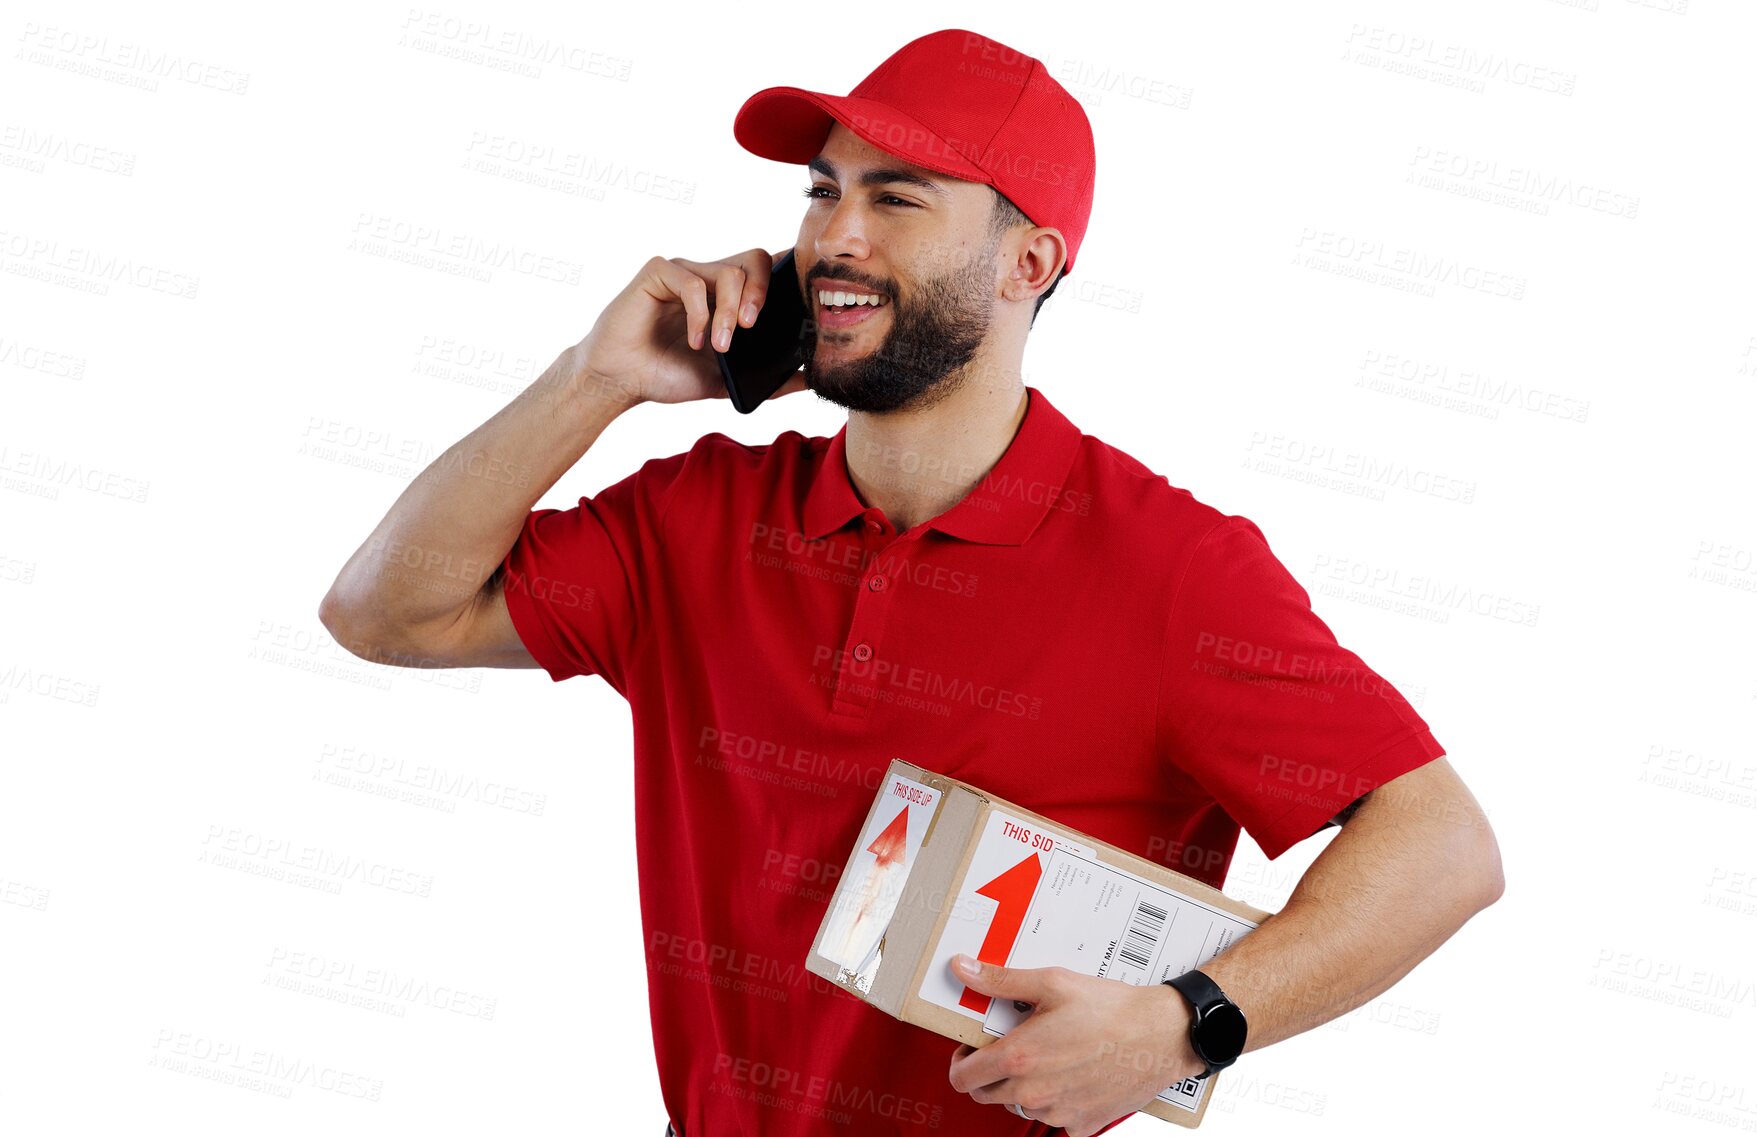 Buy stock photo Happy man, phone call and delivery with box in conversation or logistics on a transparent PNG background. Male person or courier guy talking on mobile smartphone for parcel, package or online order